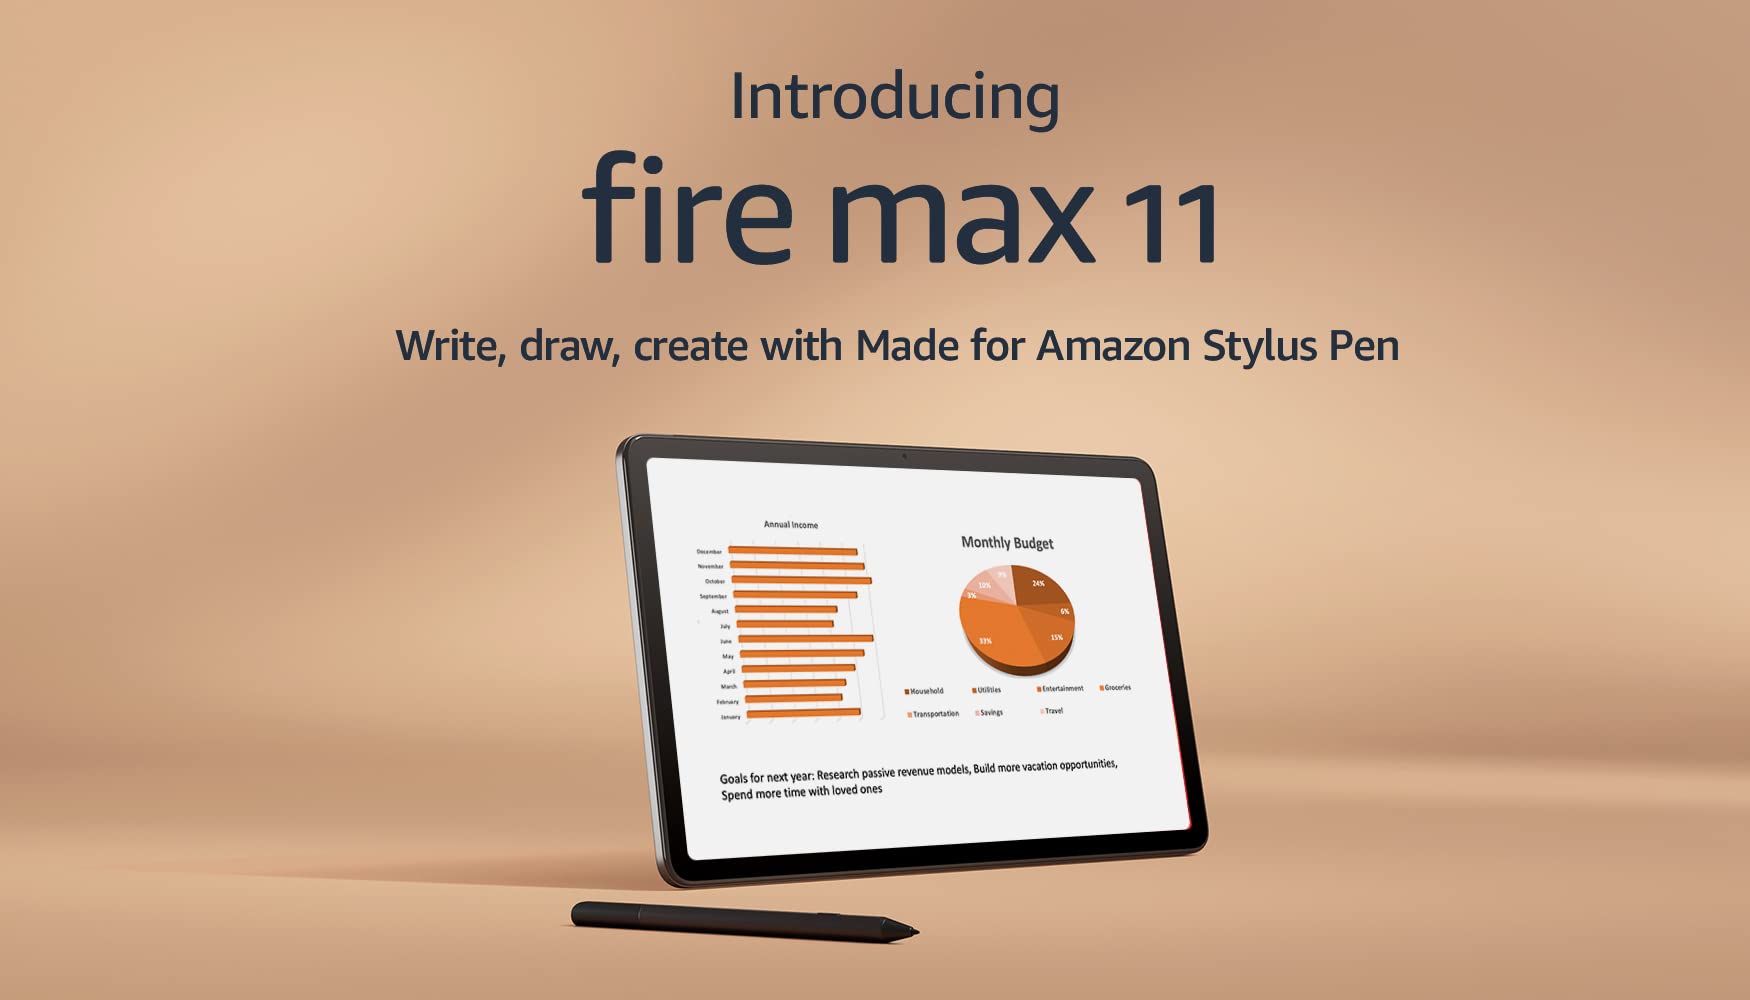 Introducing Amazon Fire Max 11 tablet and Stylus Pen bundle, handwrite notes or doodle ideas anywhere, 64 GB, Gray